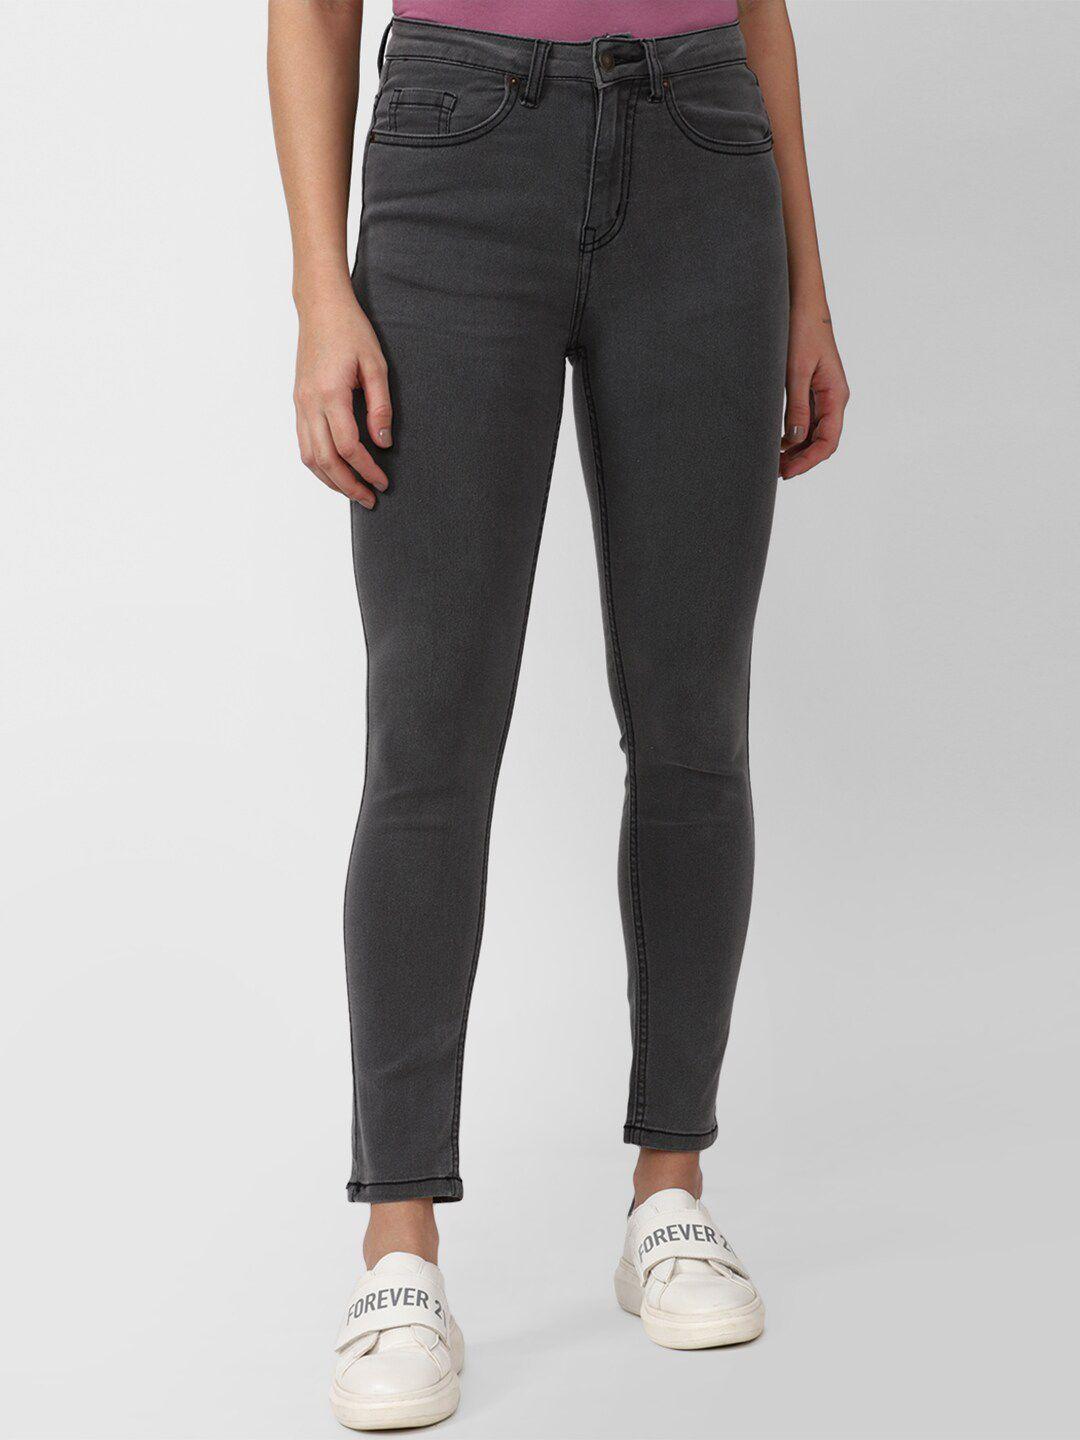 forever 21 women grey slim fit cotton jeans